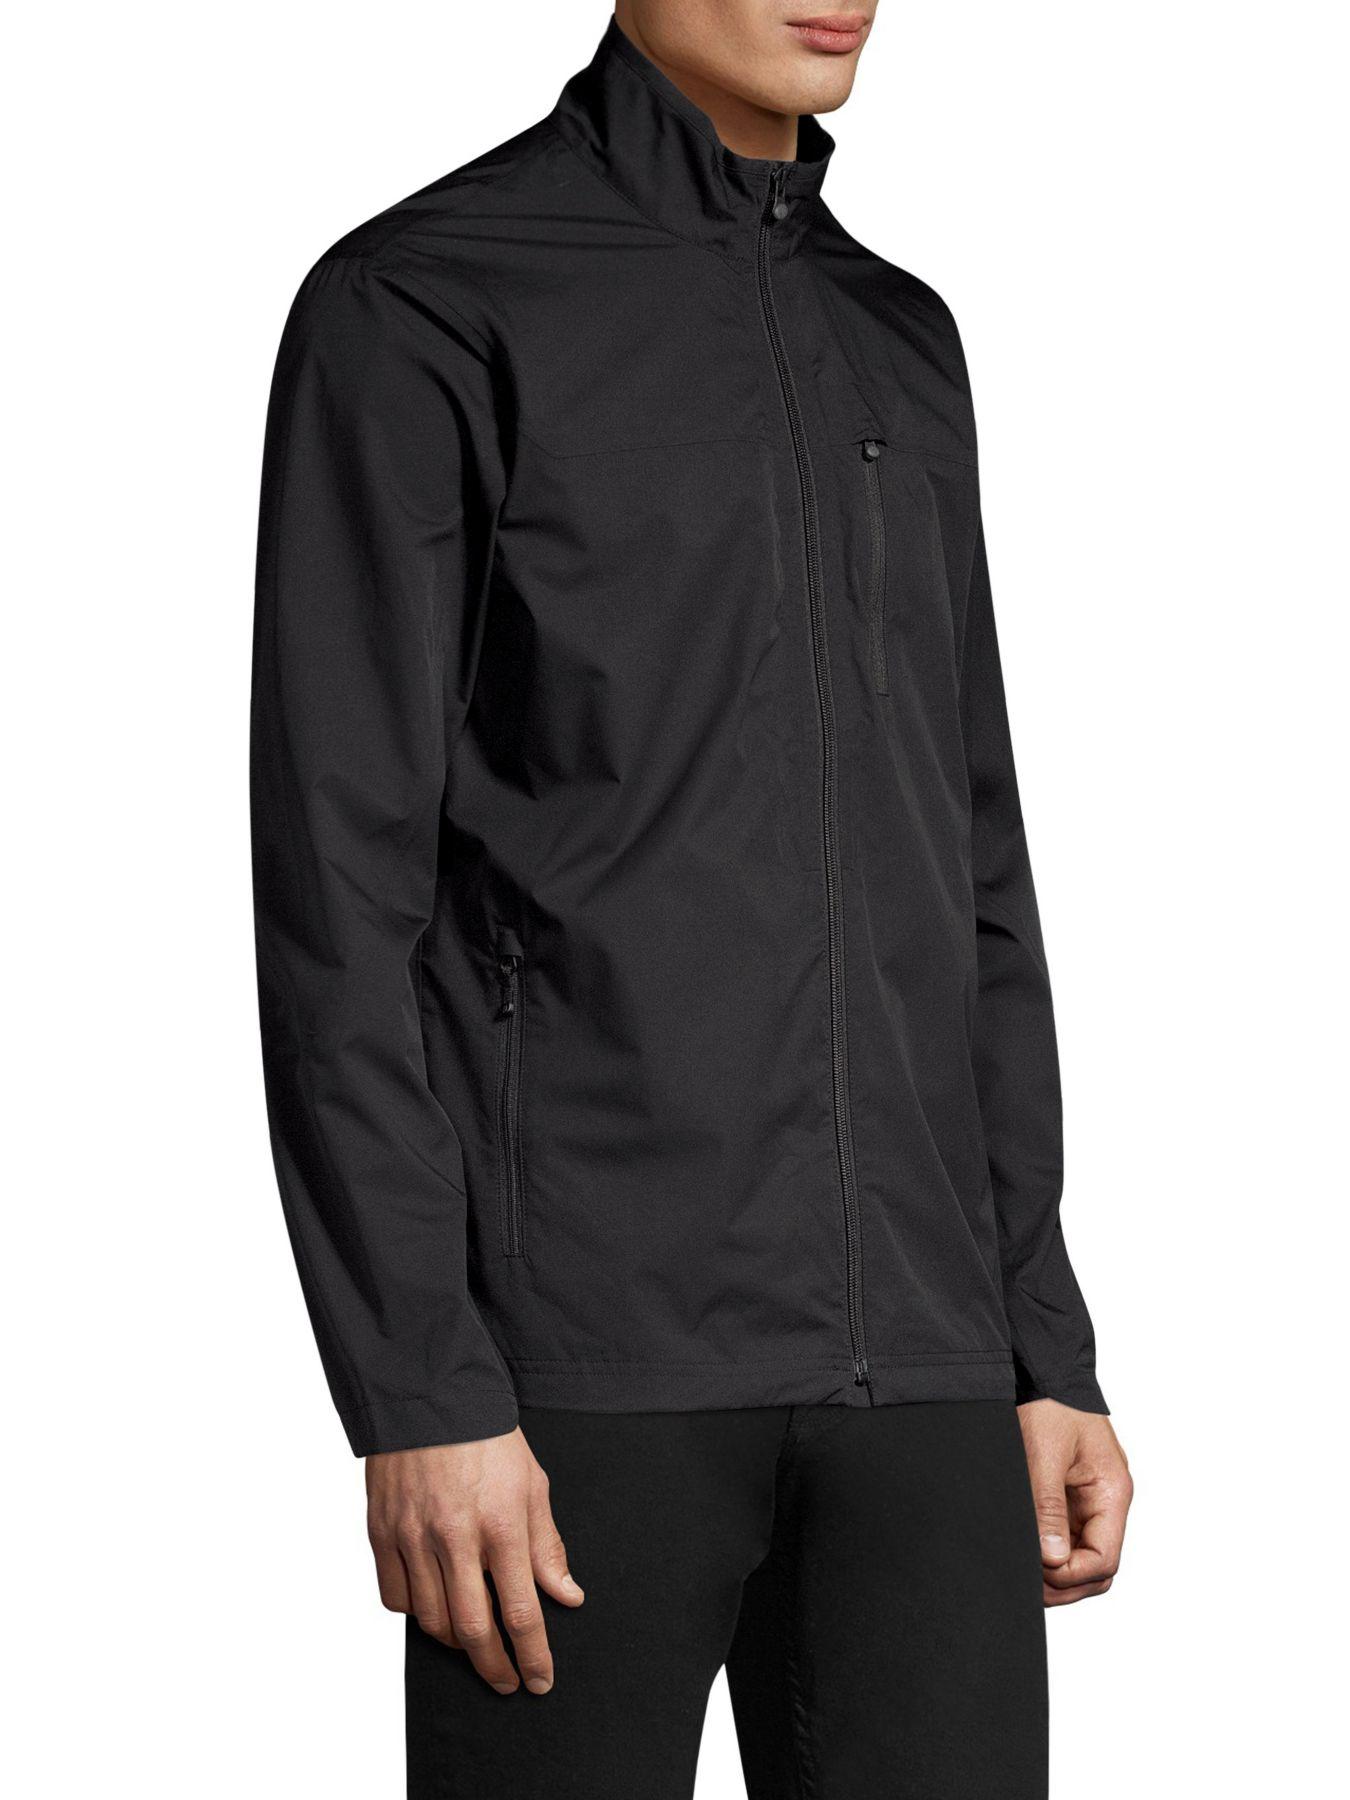 Greyson Chenoa Pebble Packable Jacket in Black for Men | Lyst